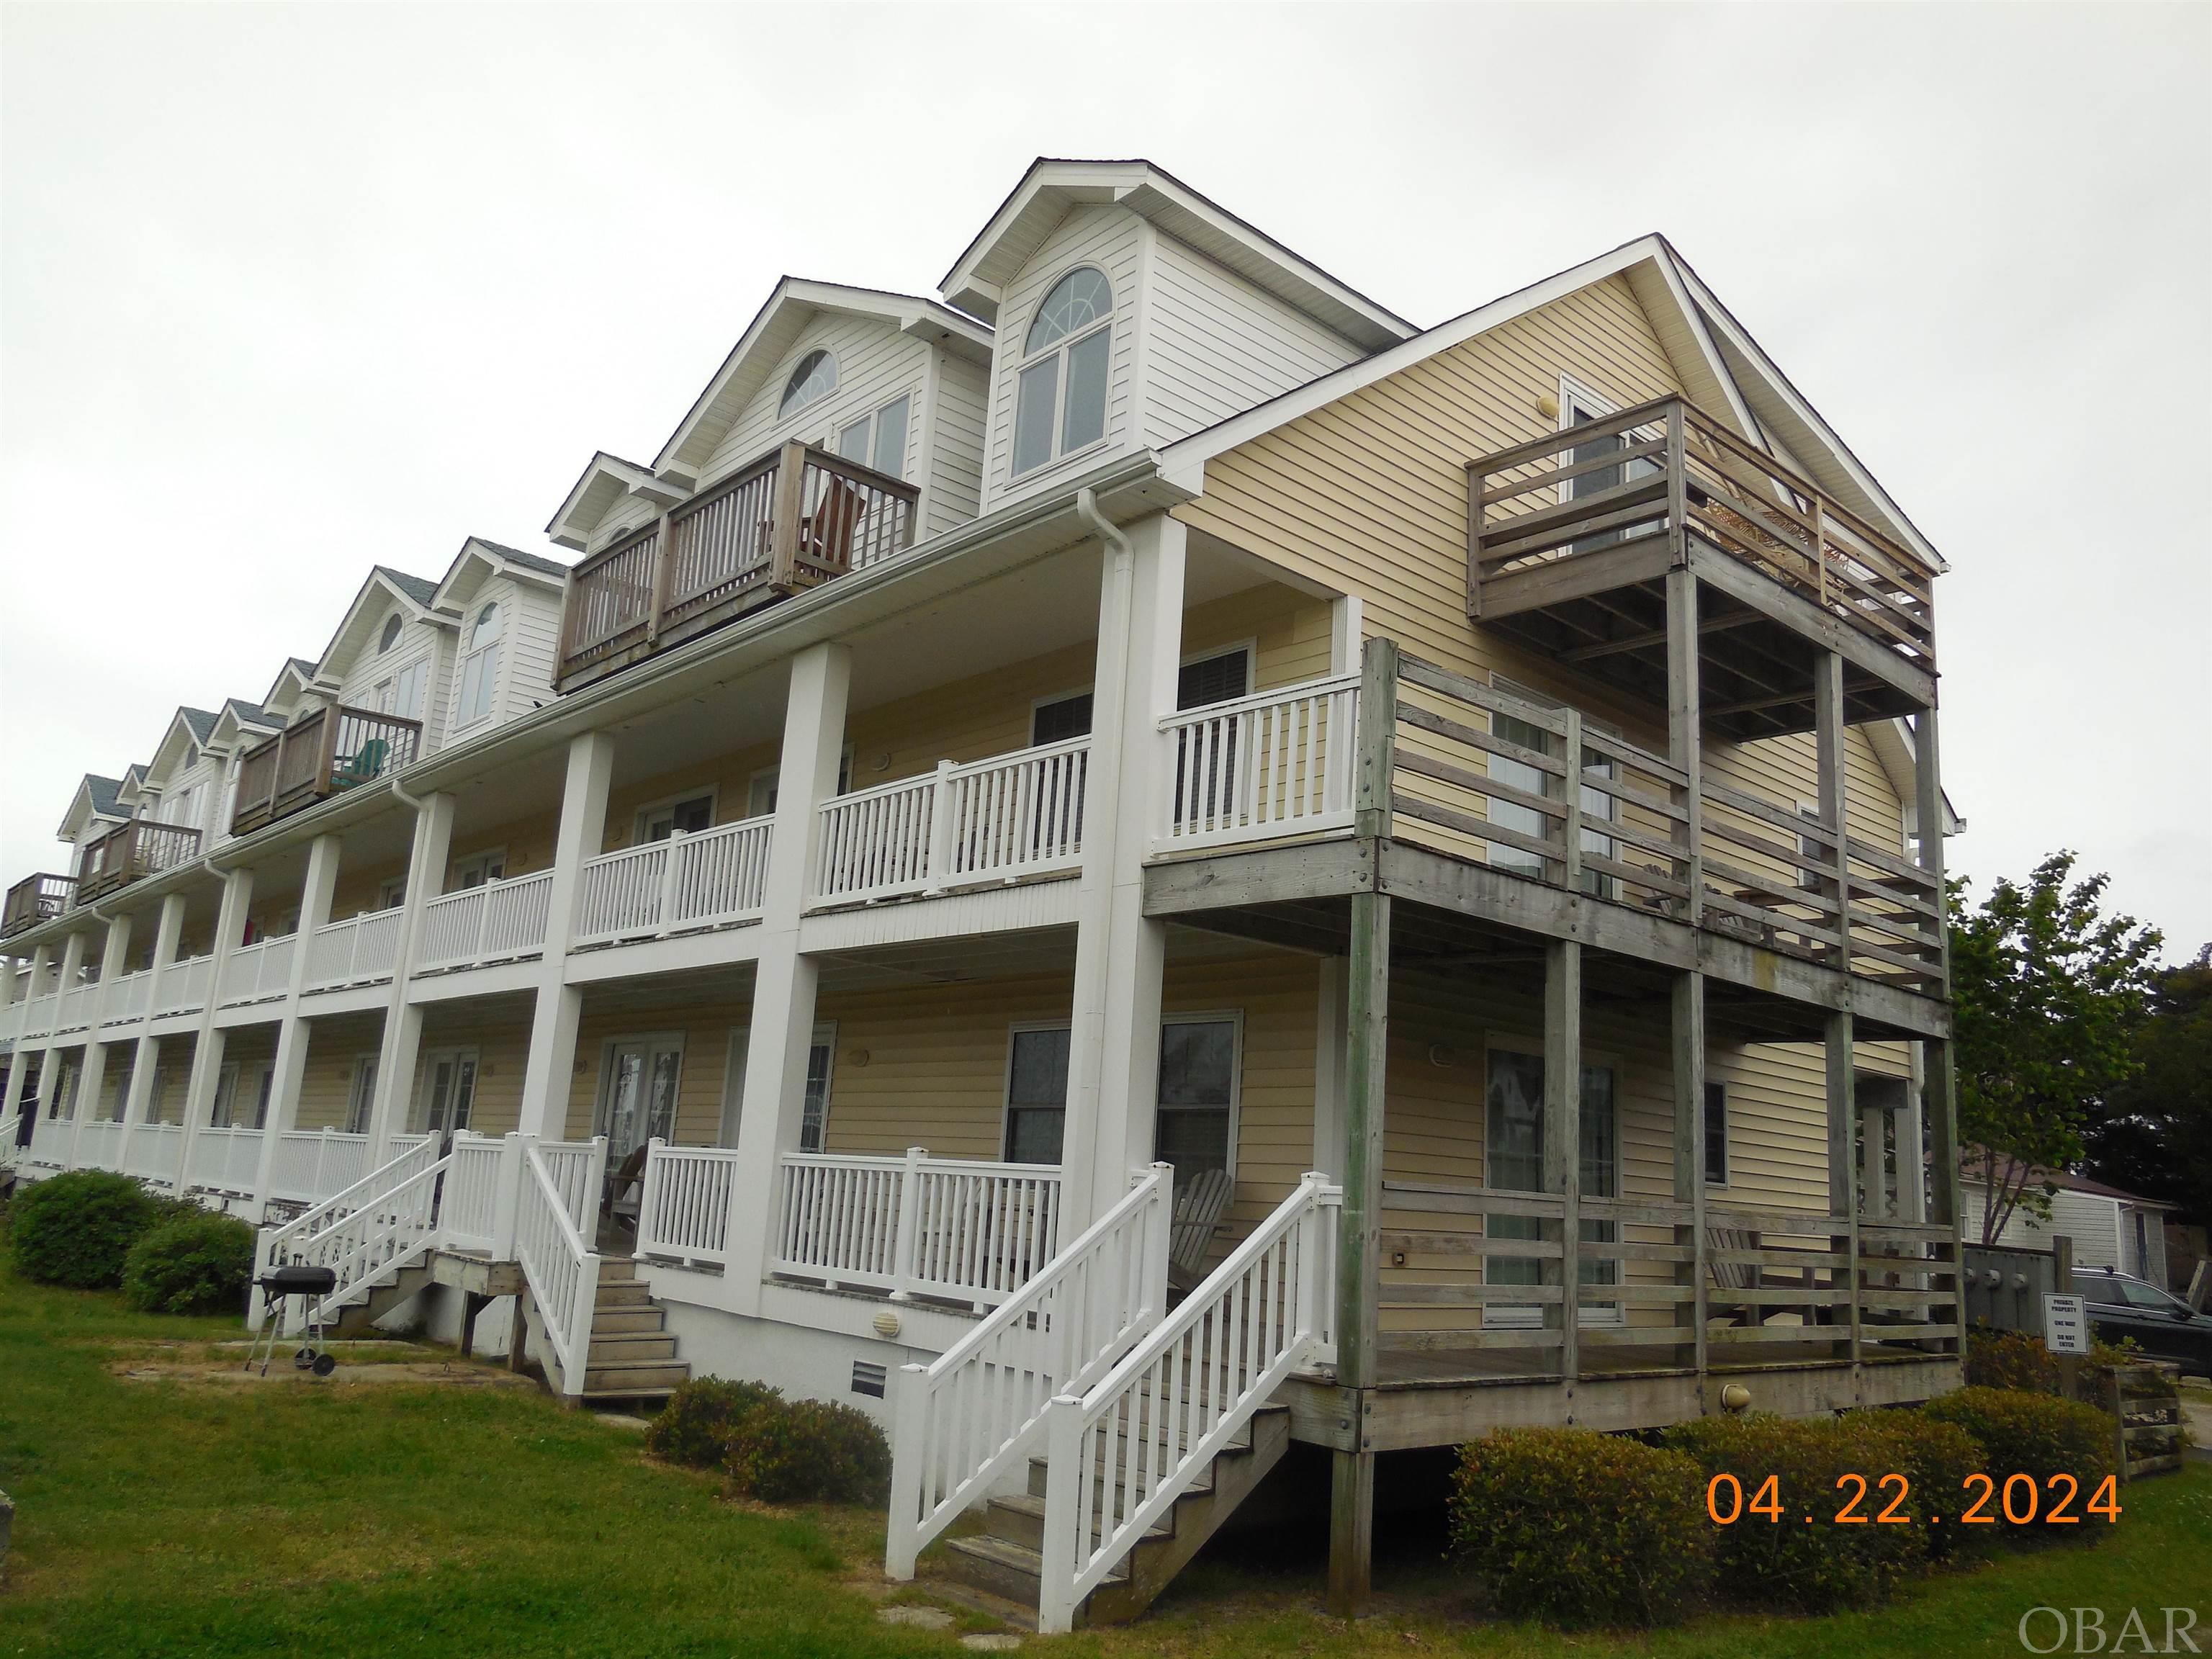 A 2 bed/2 full bath, end unit, penthouse condo, centrally located in Ocracoke village, within walking distance to everything Ocracoke has to offer! 2 gracious owner suites, each with a bathroom consisting of a large jetted tub and separate shower. Oak floors in all living/sleeping spaces and tile in bathrooms. New HVAC system in 2023 (July)! Open kitchen/living/dining area with access to a small deck overlooking the front lawn with a view of the beautiful new Island Inn gardens. A park with wonderful flowers, meditation area, benches and convenient tram stop. Central heat/ac, ceiling fans, recesssed lighting, large closets and plenty of windows for natural light. There is an additional Juliette deck off one of the bedrooms; a great place to enjoy your morning coffee, an afternoon drink or late night stargazing! Conveys fully furnished (excluding some personal artwork). This unit is currently a vacation rental but could easily transition into a year round residence or second home. Condo complex offers golf cart charging stations, bike racks, off road parking, grilling area and a large grassed yard for outdoor activities.